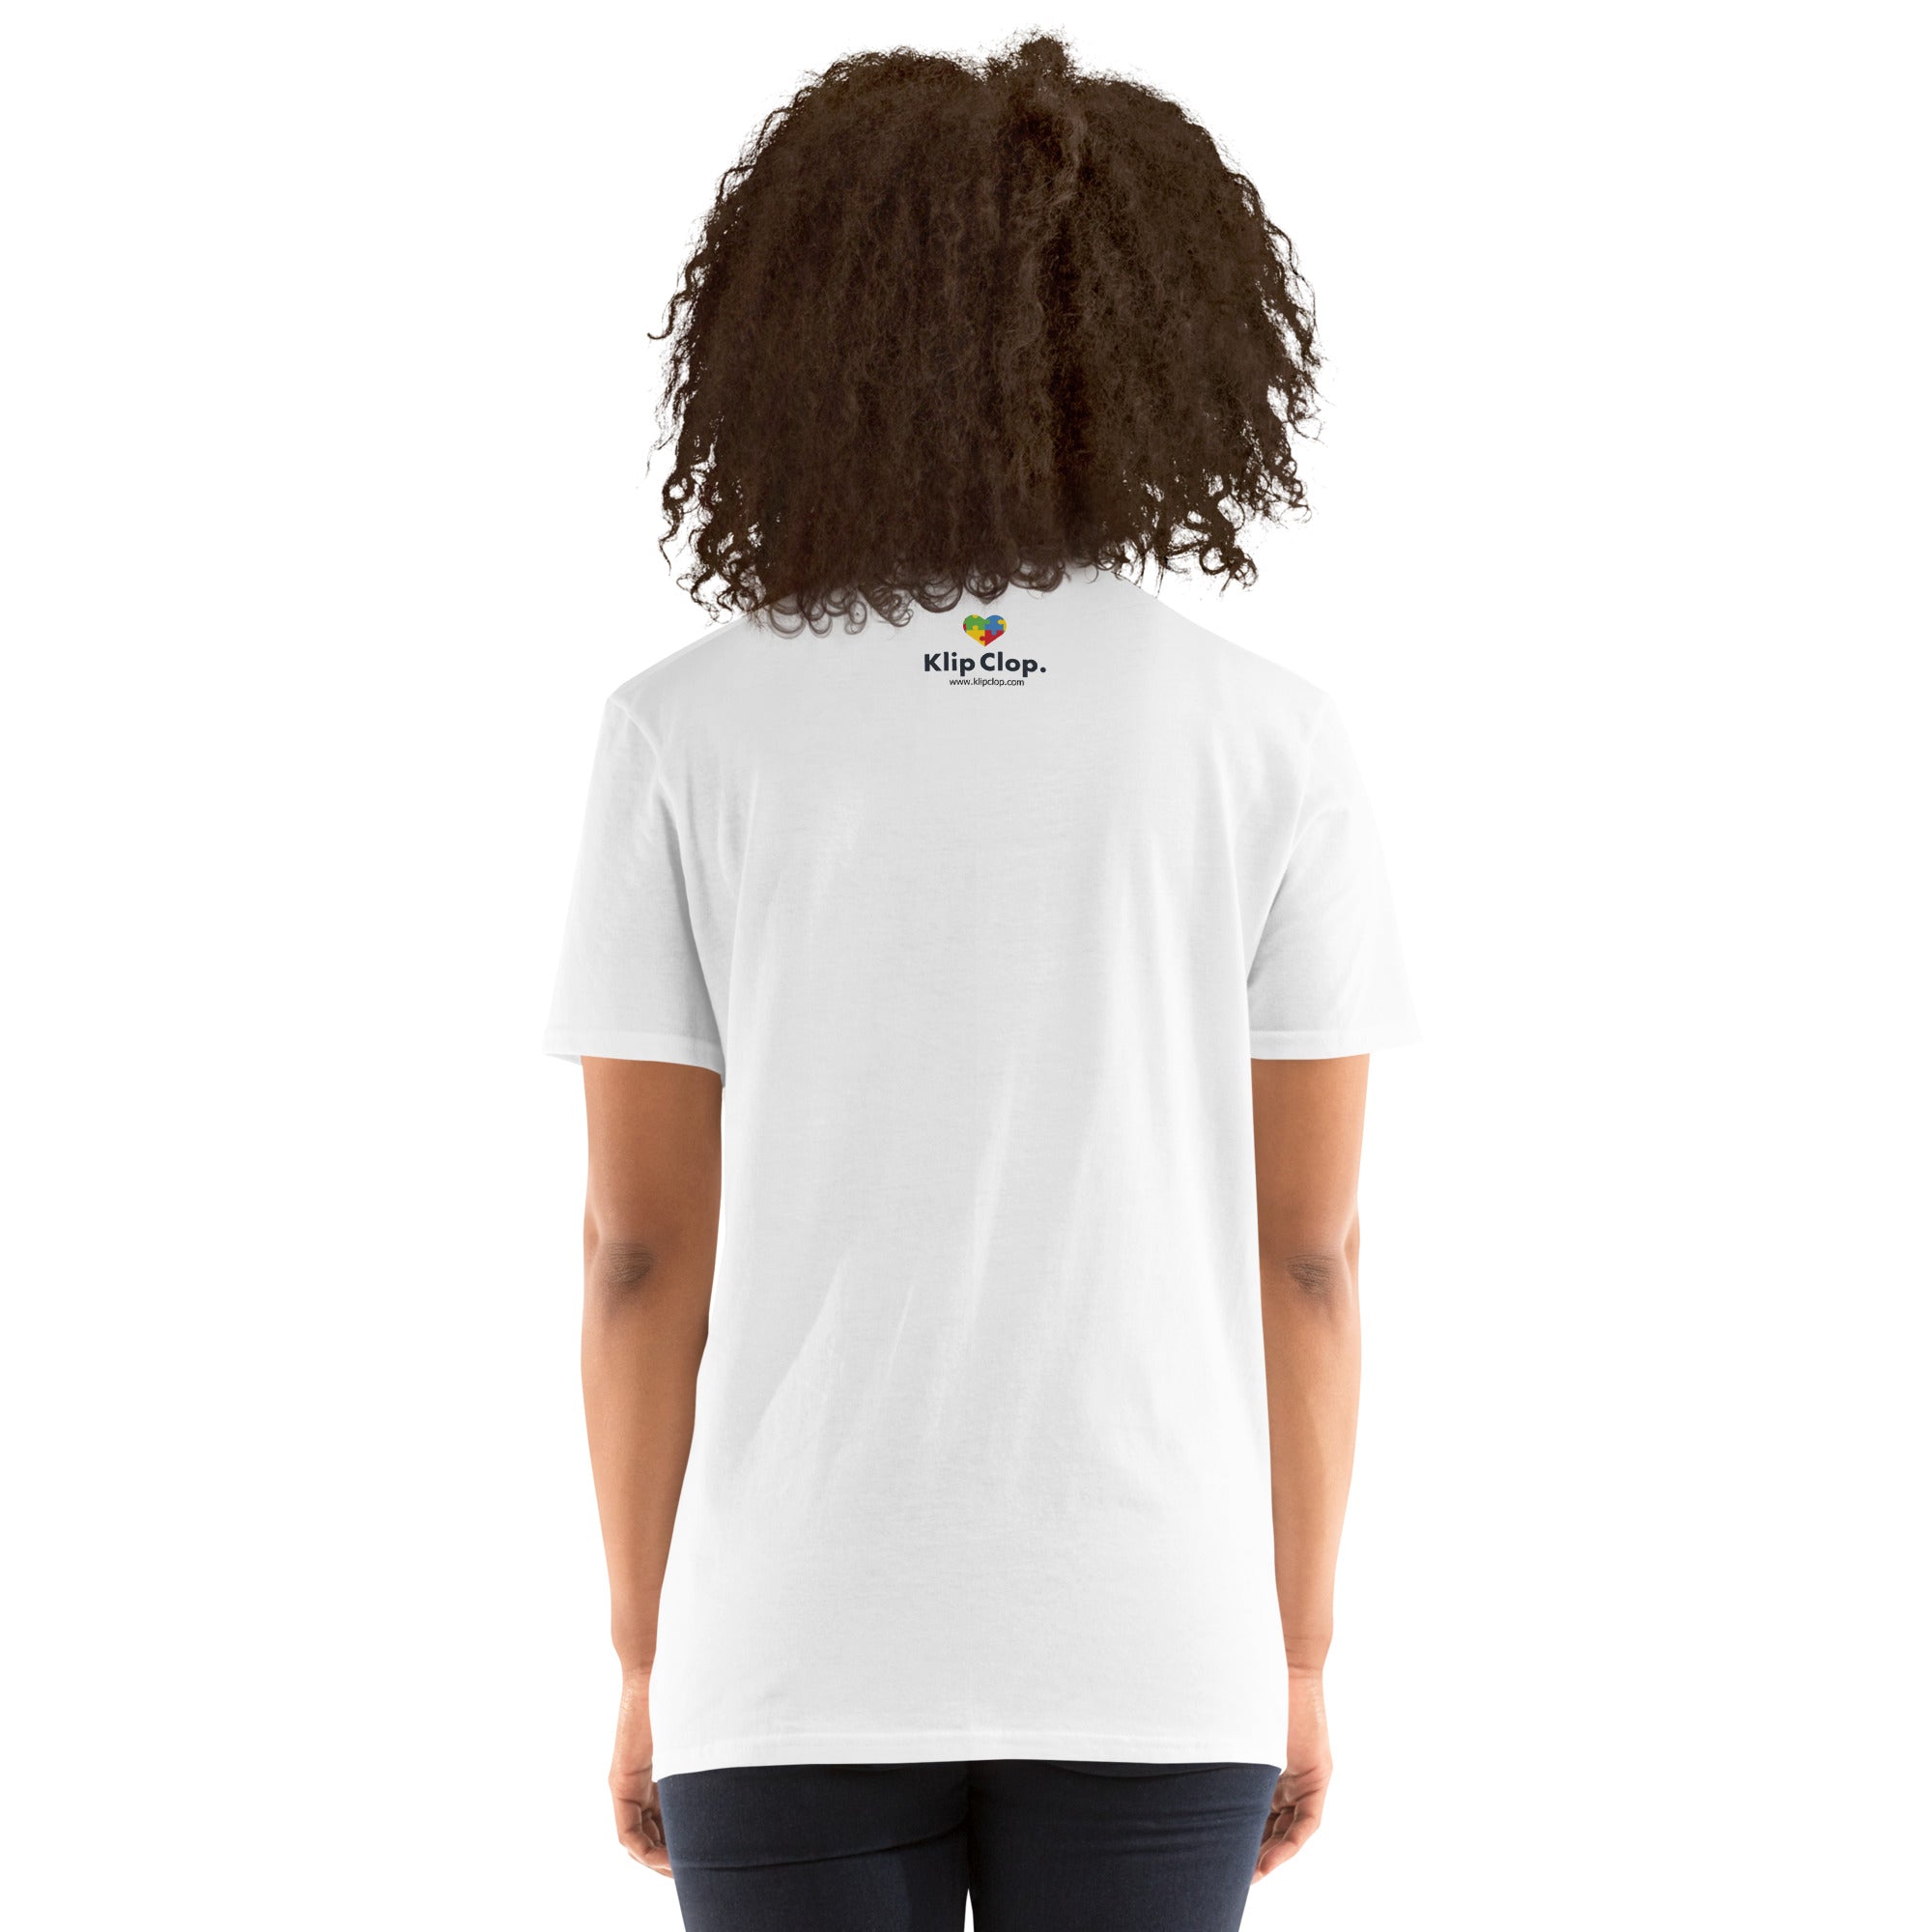 Short-Sleeve Unisex T-Shirt- In a world where you can be